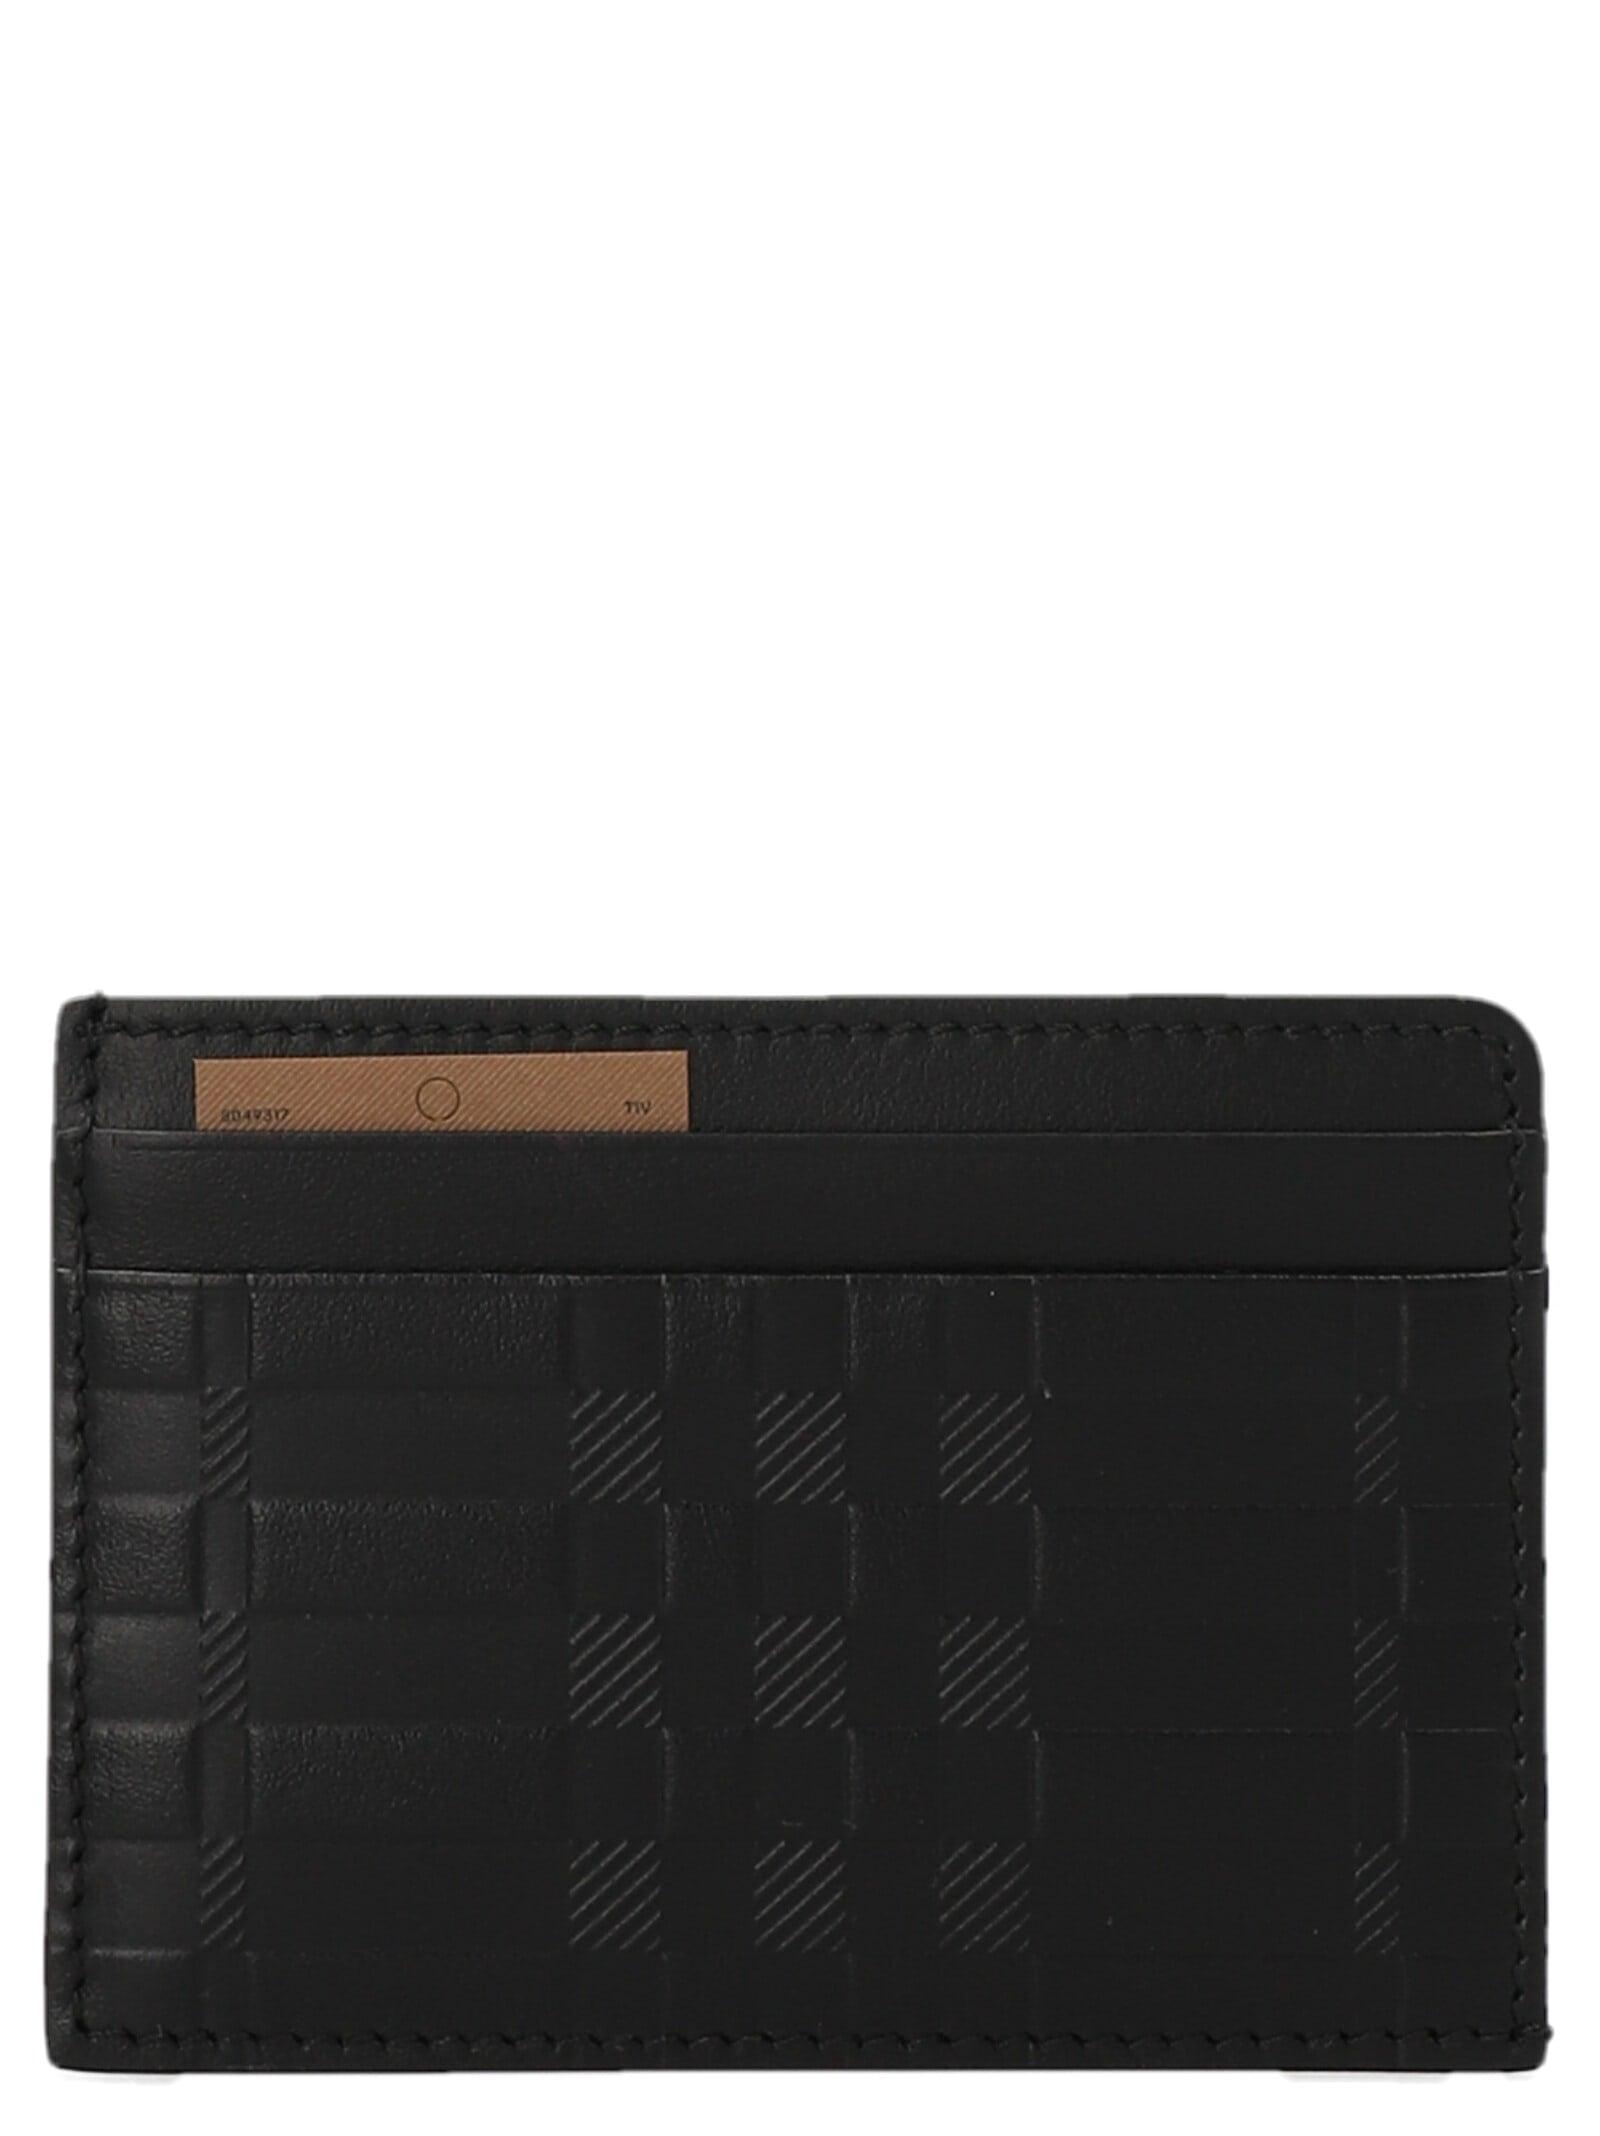 Womens Accessories Wallets and cardholders Save 15% Burberry sandon Card Holder in Brown 